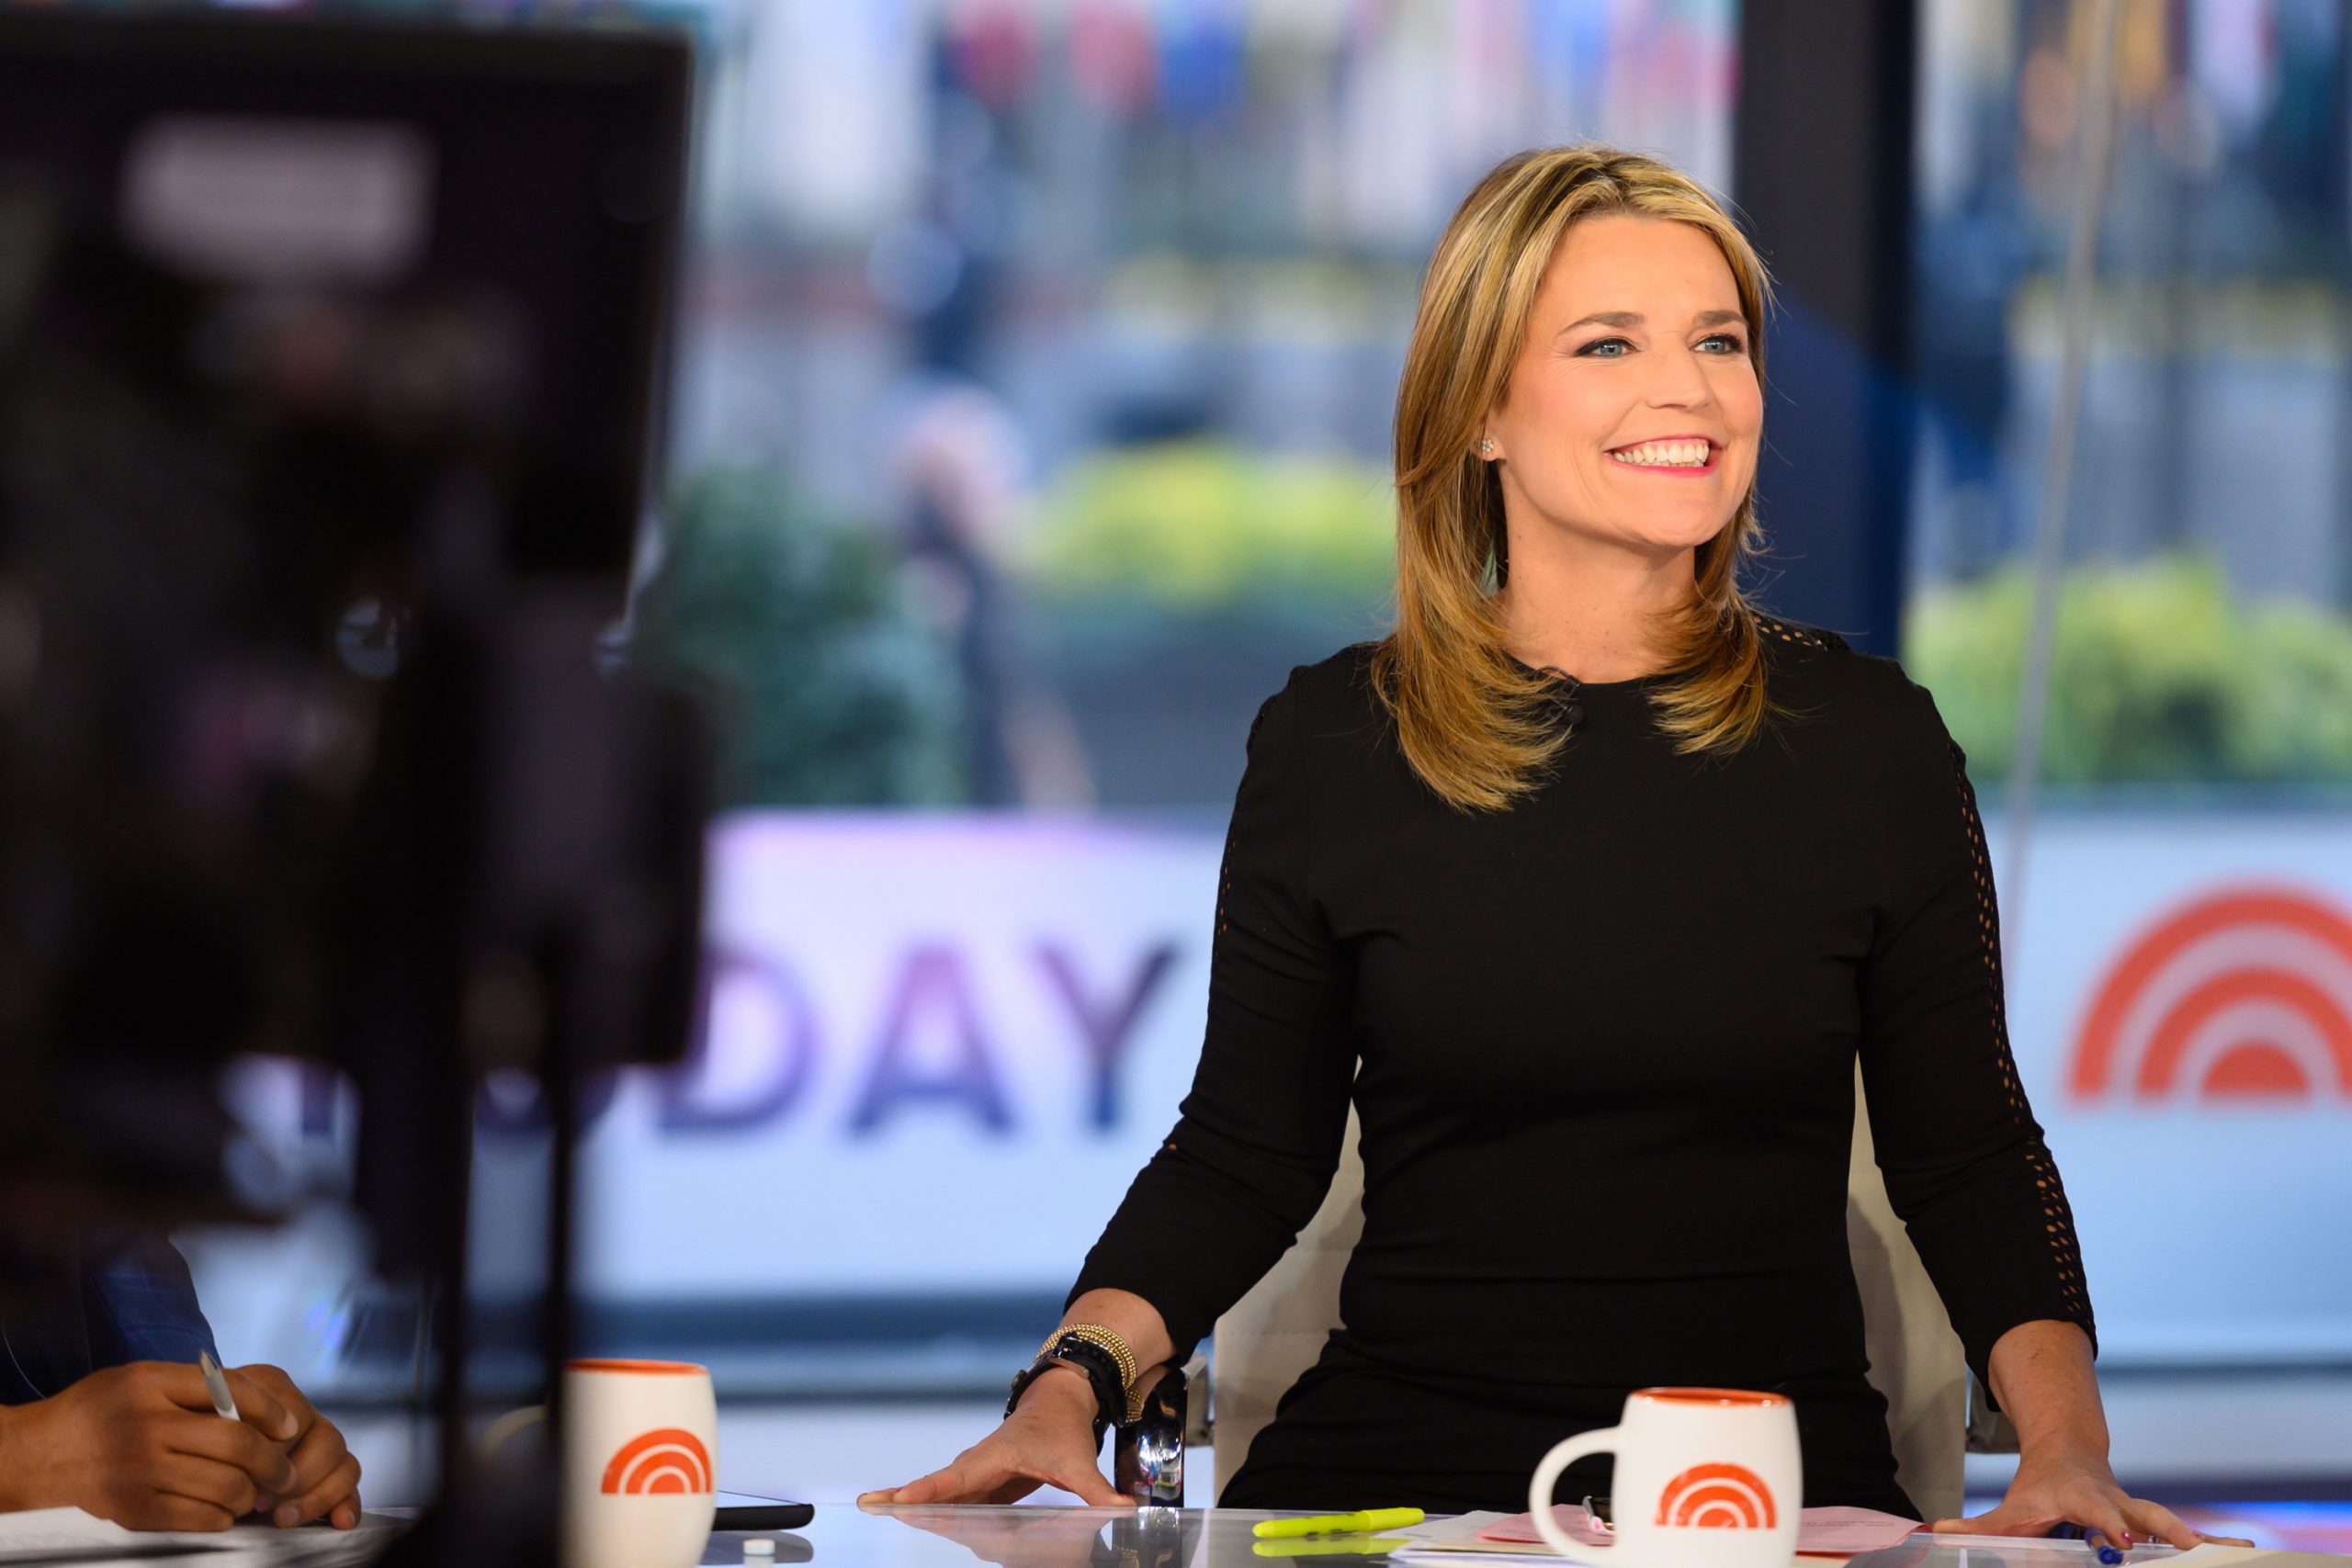 Morning show co-host Savannah Guthrie smiles as she sits at her anchor chair on the set of 'Today' in a long-sleeved black dress.